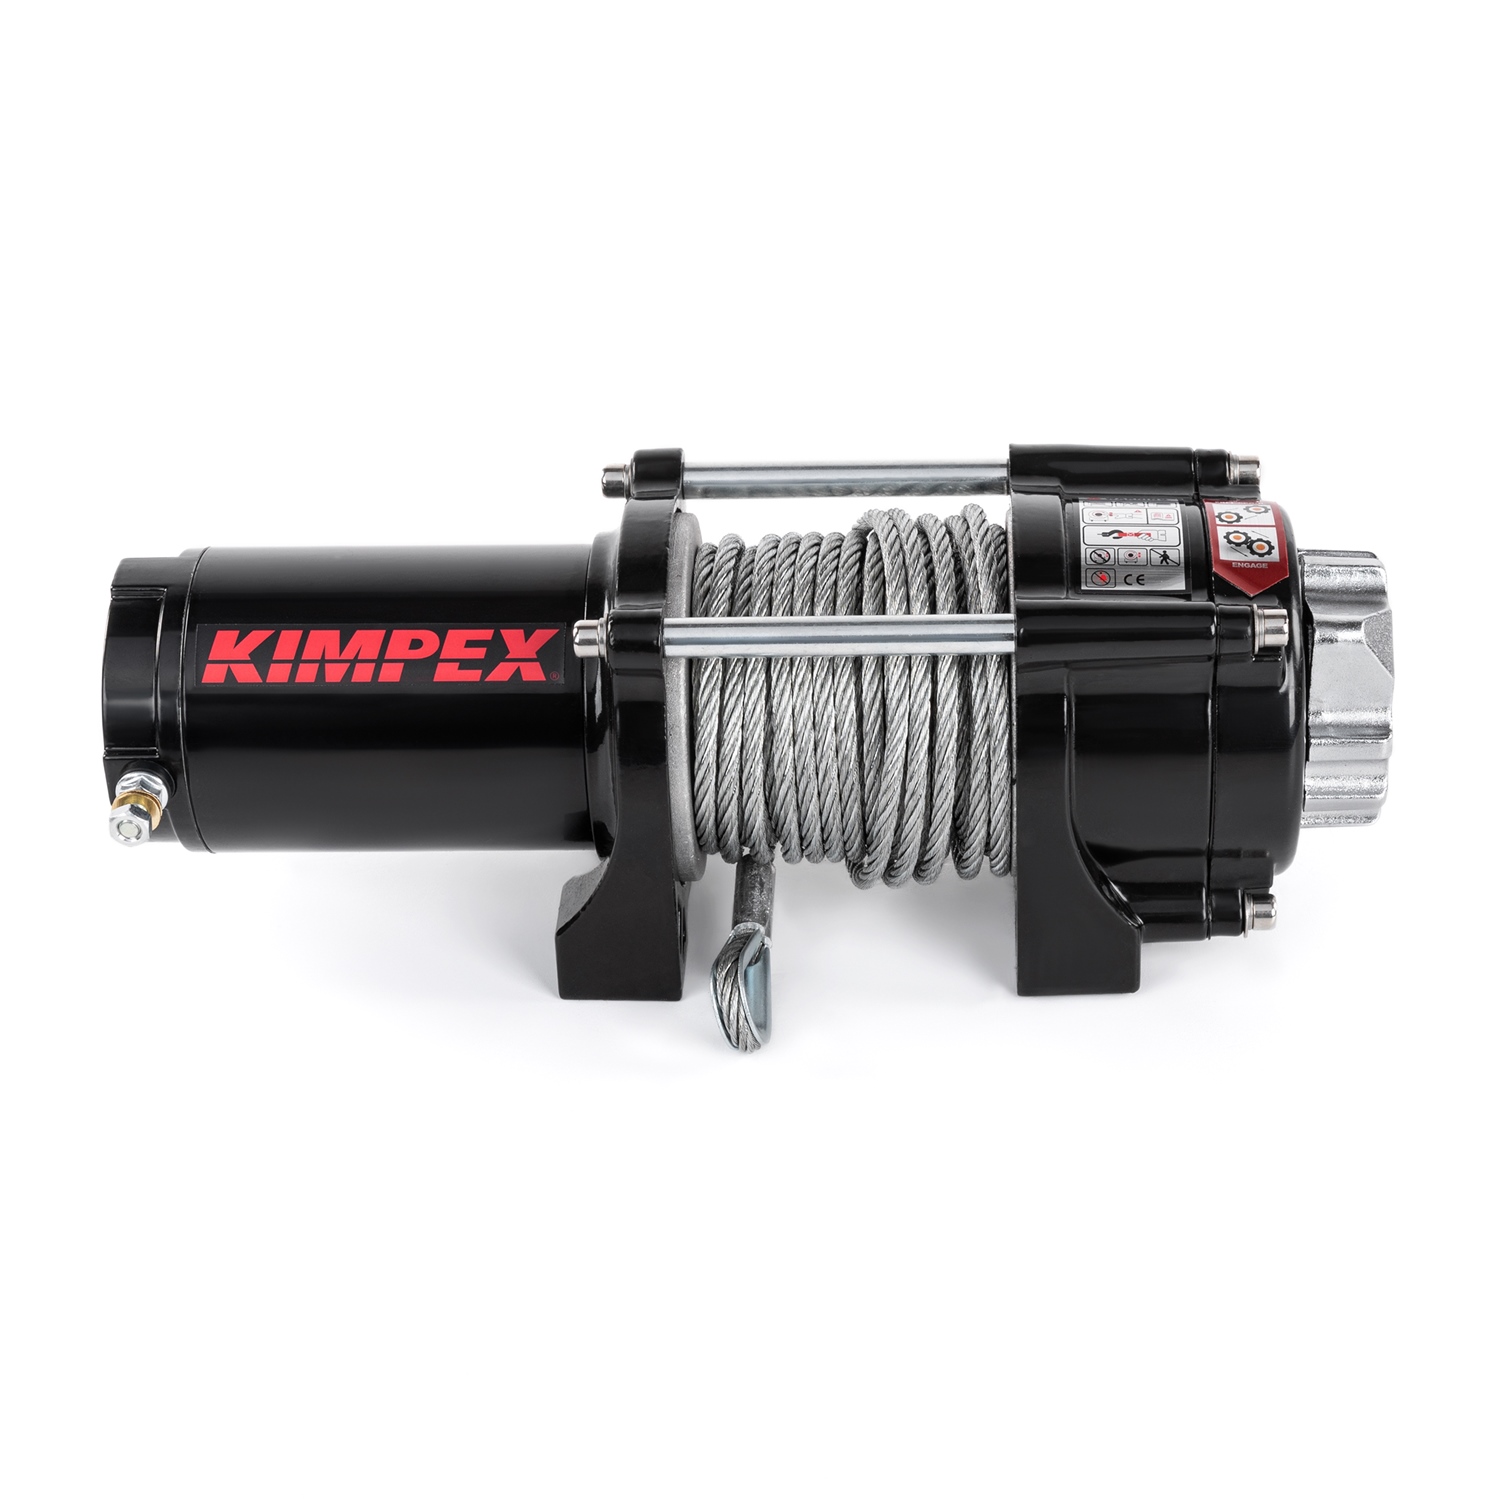 KIMPEX 2500 lbs Winch IP 67 | Kimpex USA